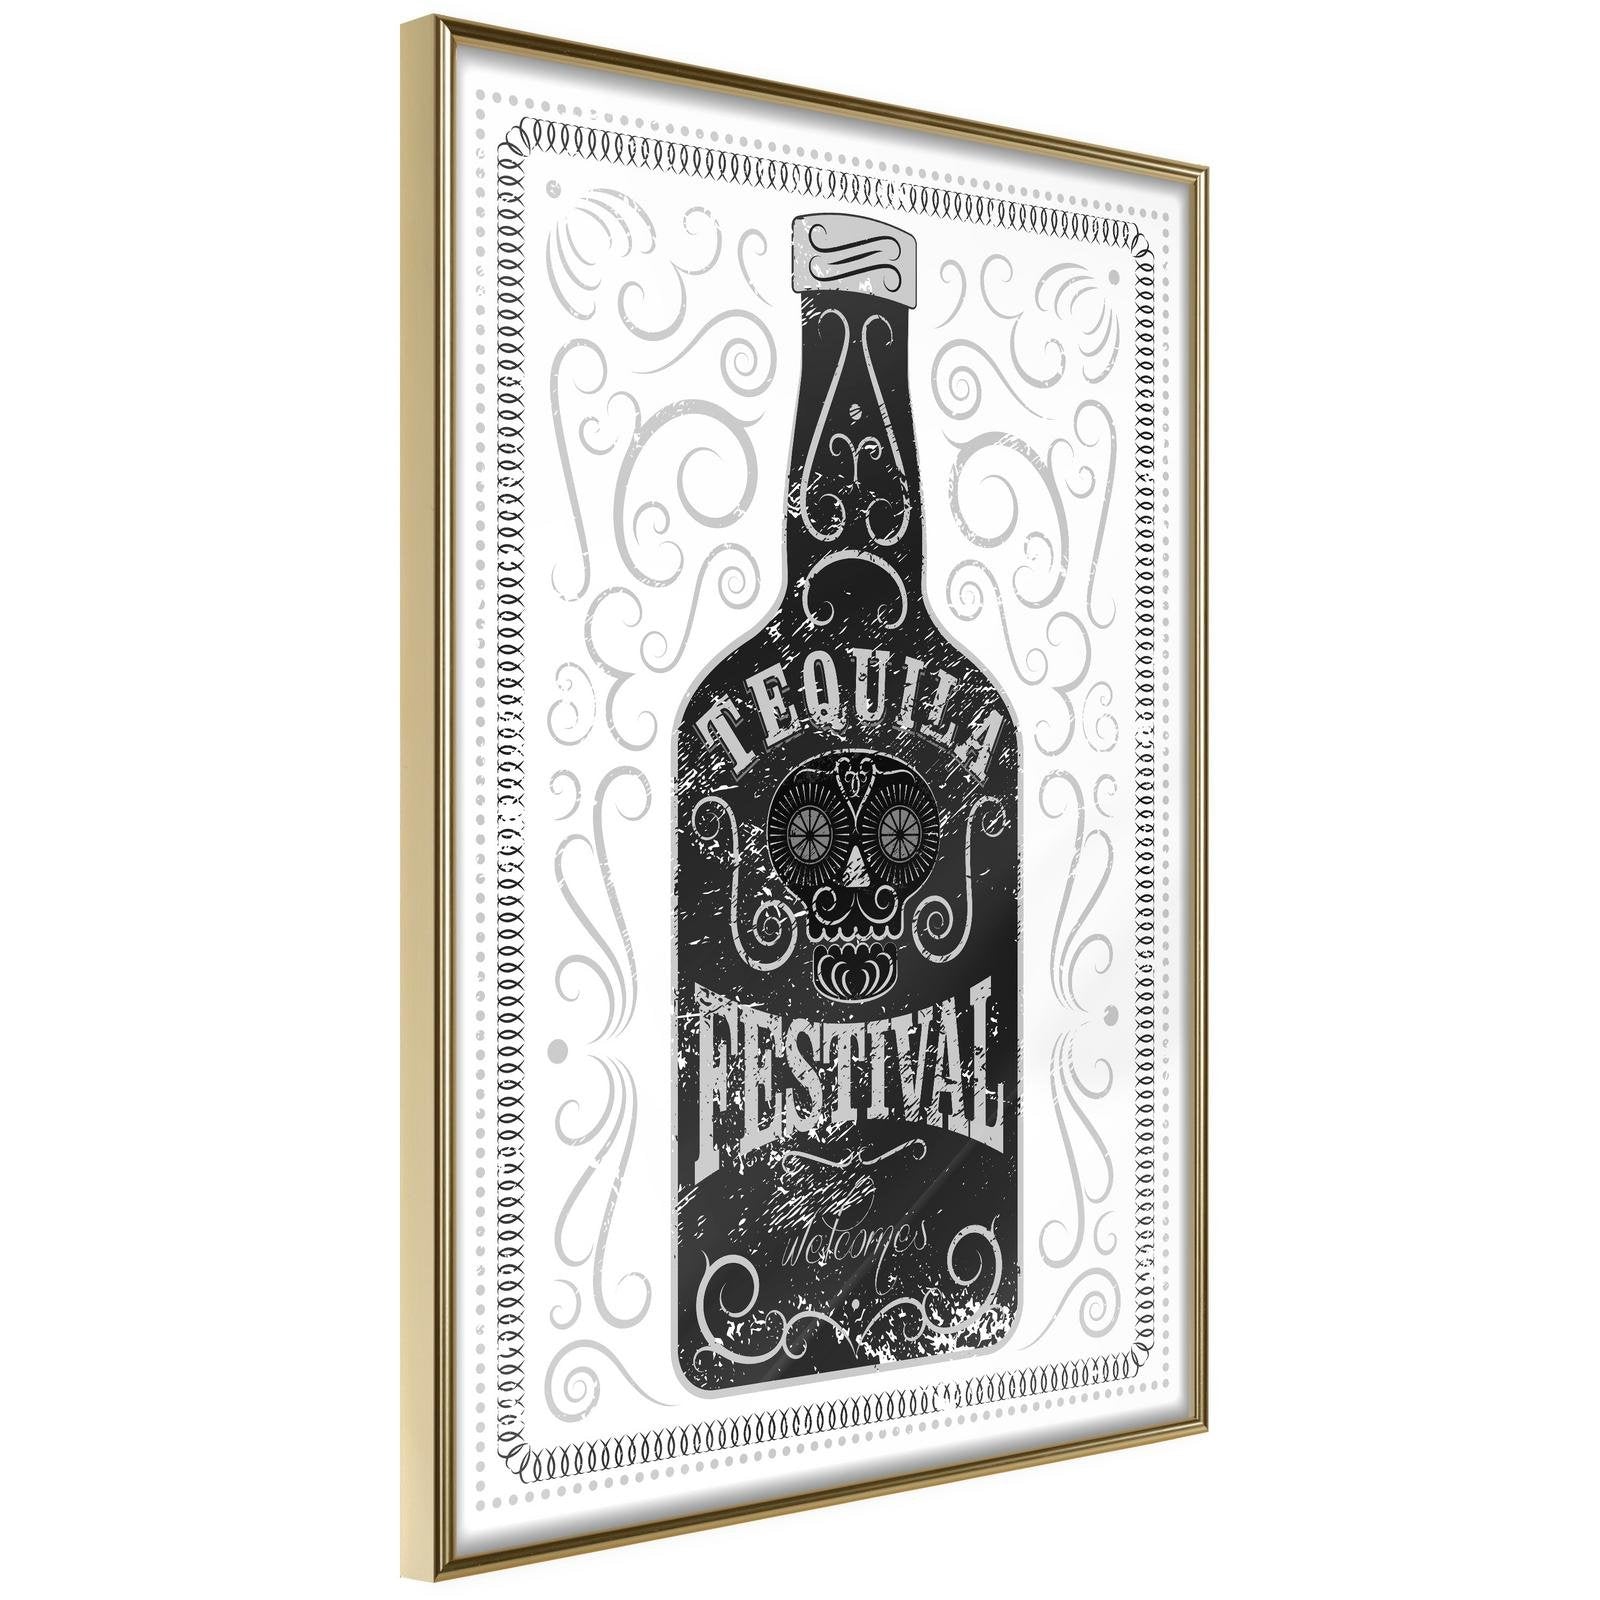 Inramad Poster / Tavla - Bottle of Tequila-Poster Inramad-Artgeist-20x30-Guldram-peaceofhome.se